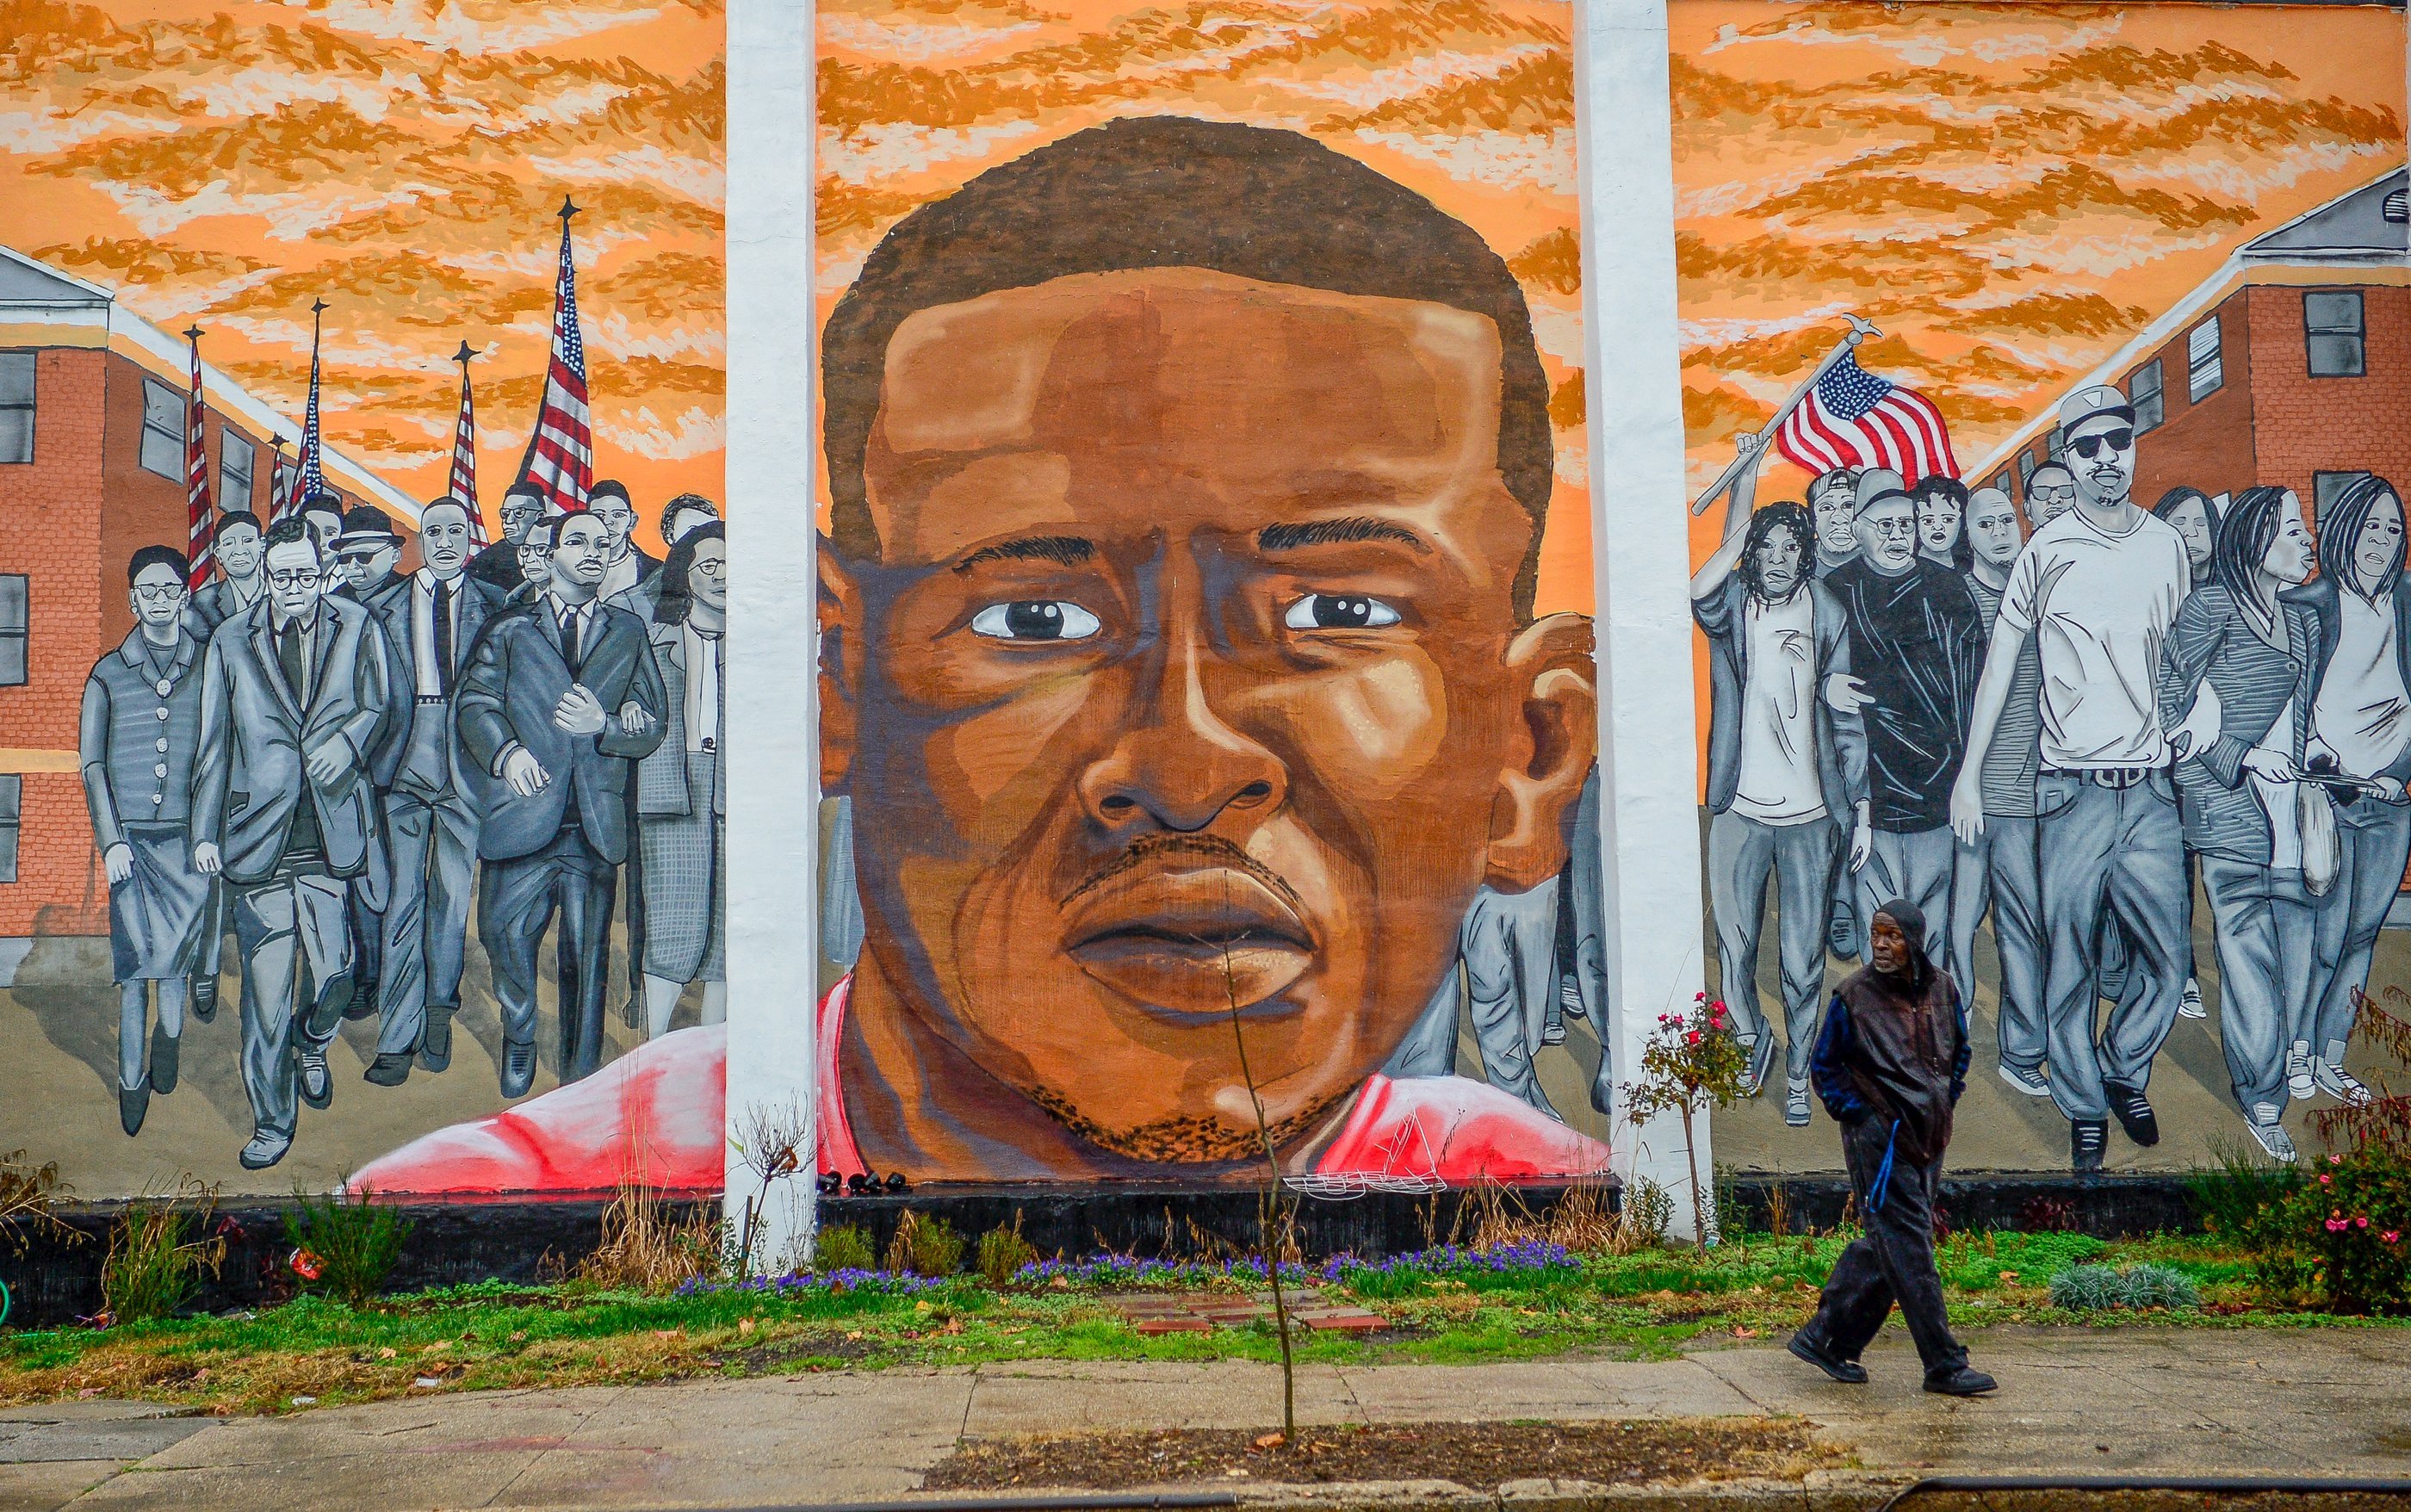 A man, who declined to offer his name, walks past a mural of Freddie Gray in the Sandtown-Winchester neighborhood of Baltimore